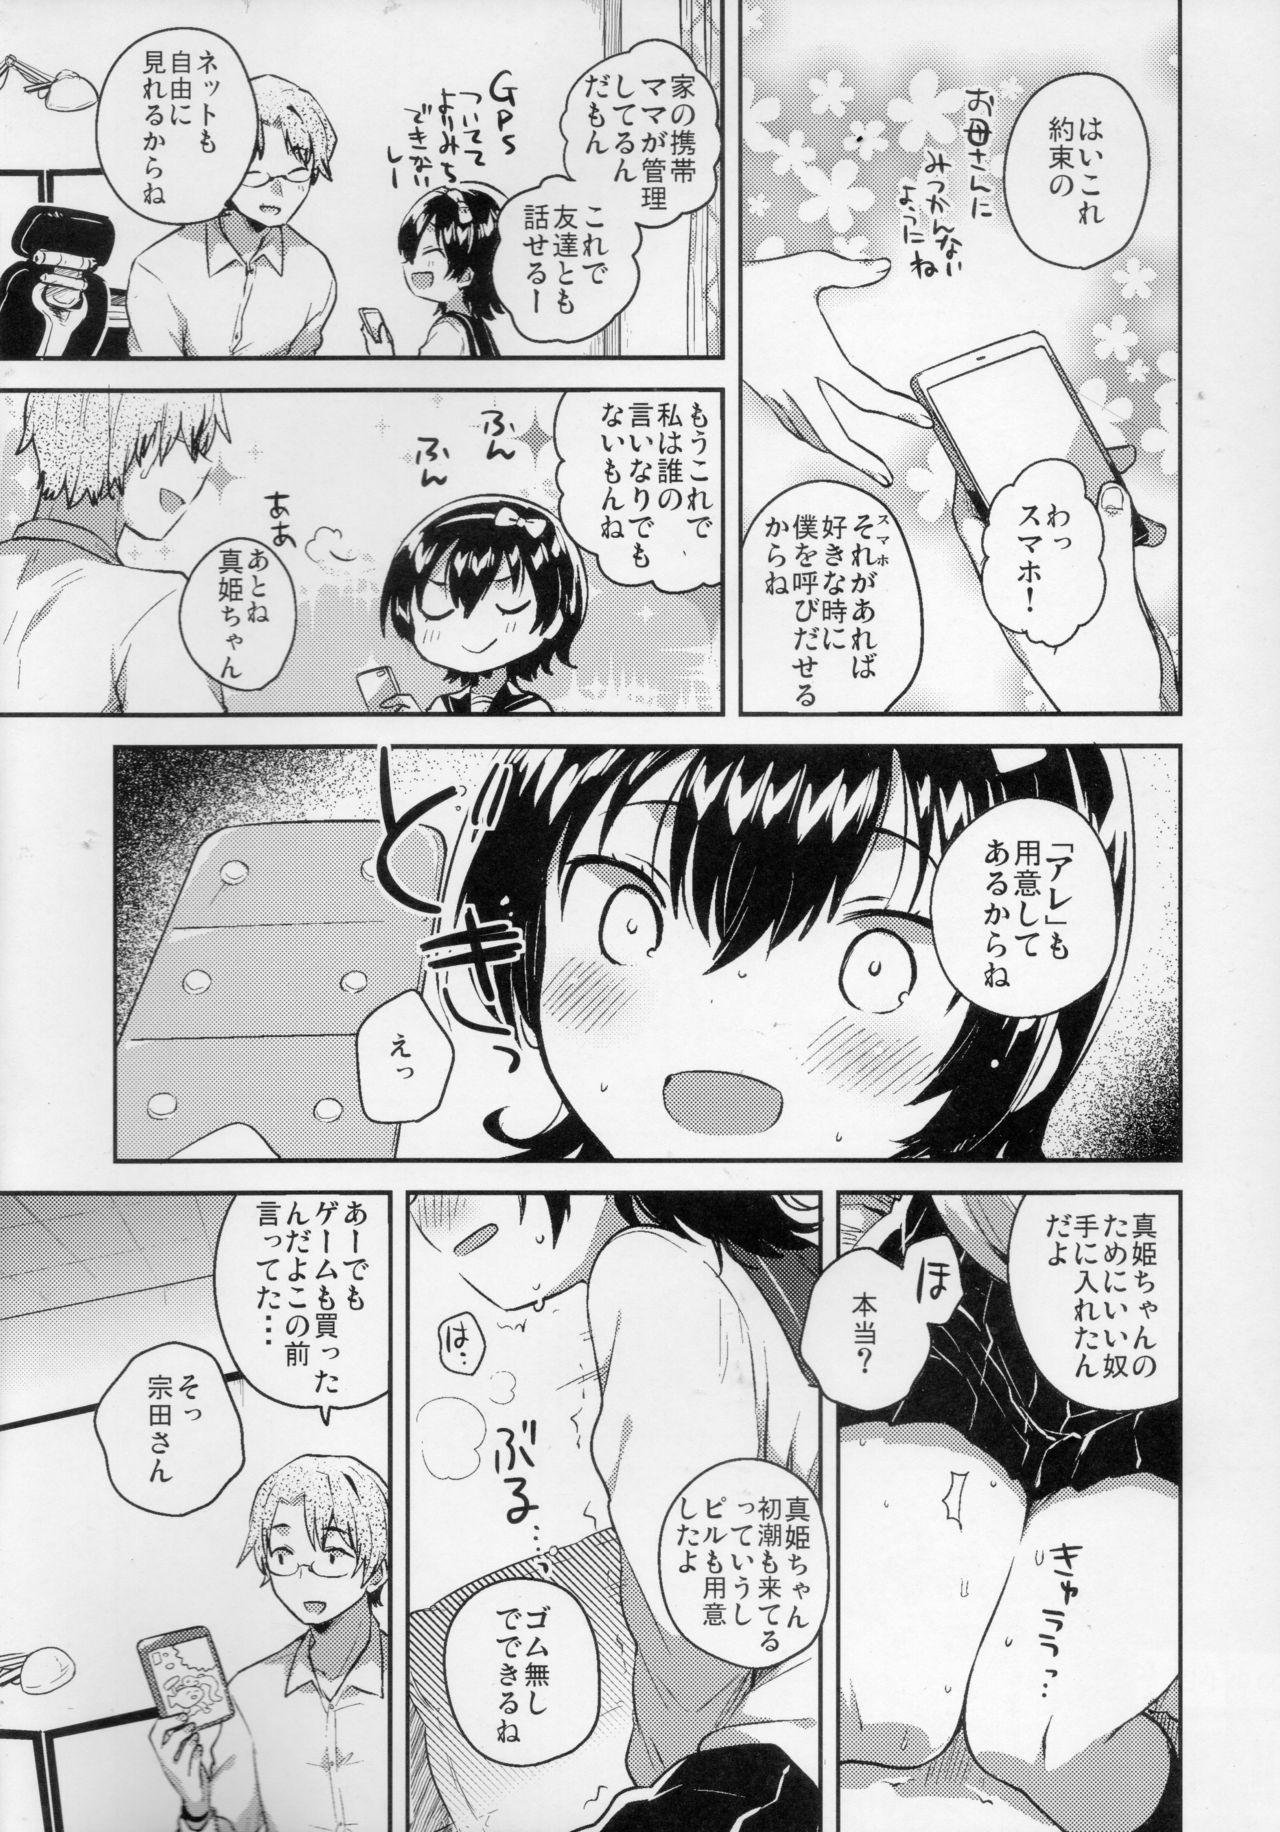 Black Hair Anoko wa Marionette - She Is marionette - Original Bisexual - Page 7